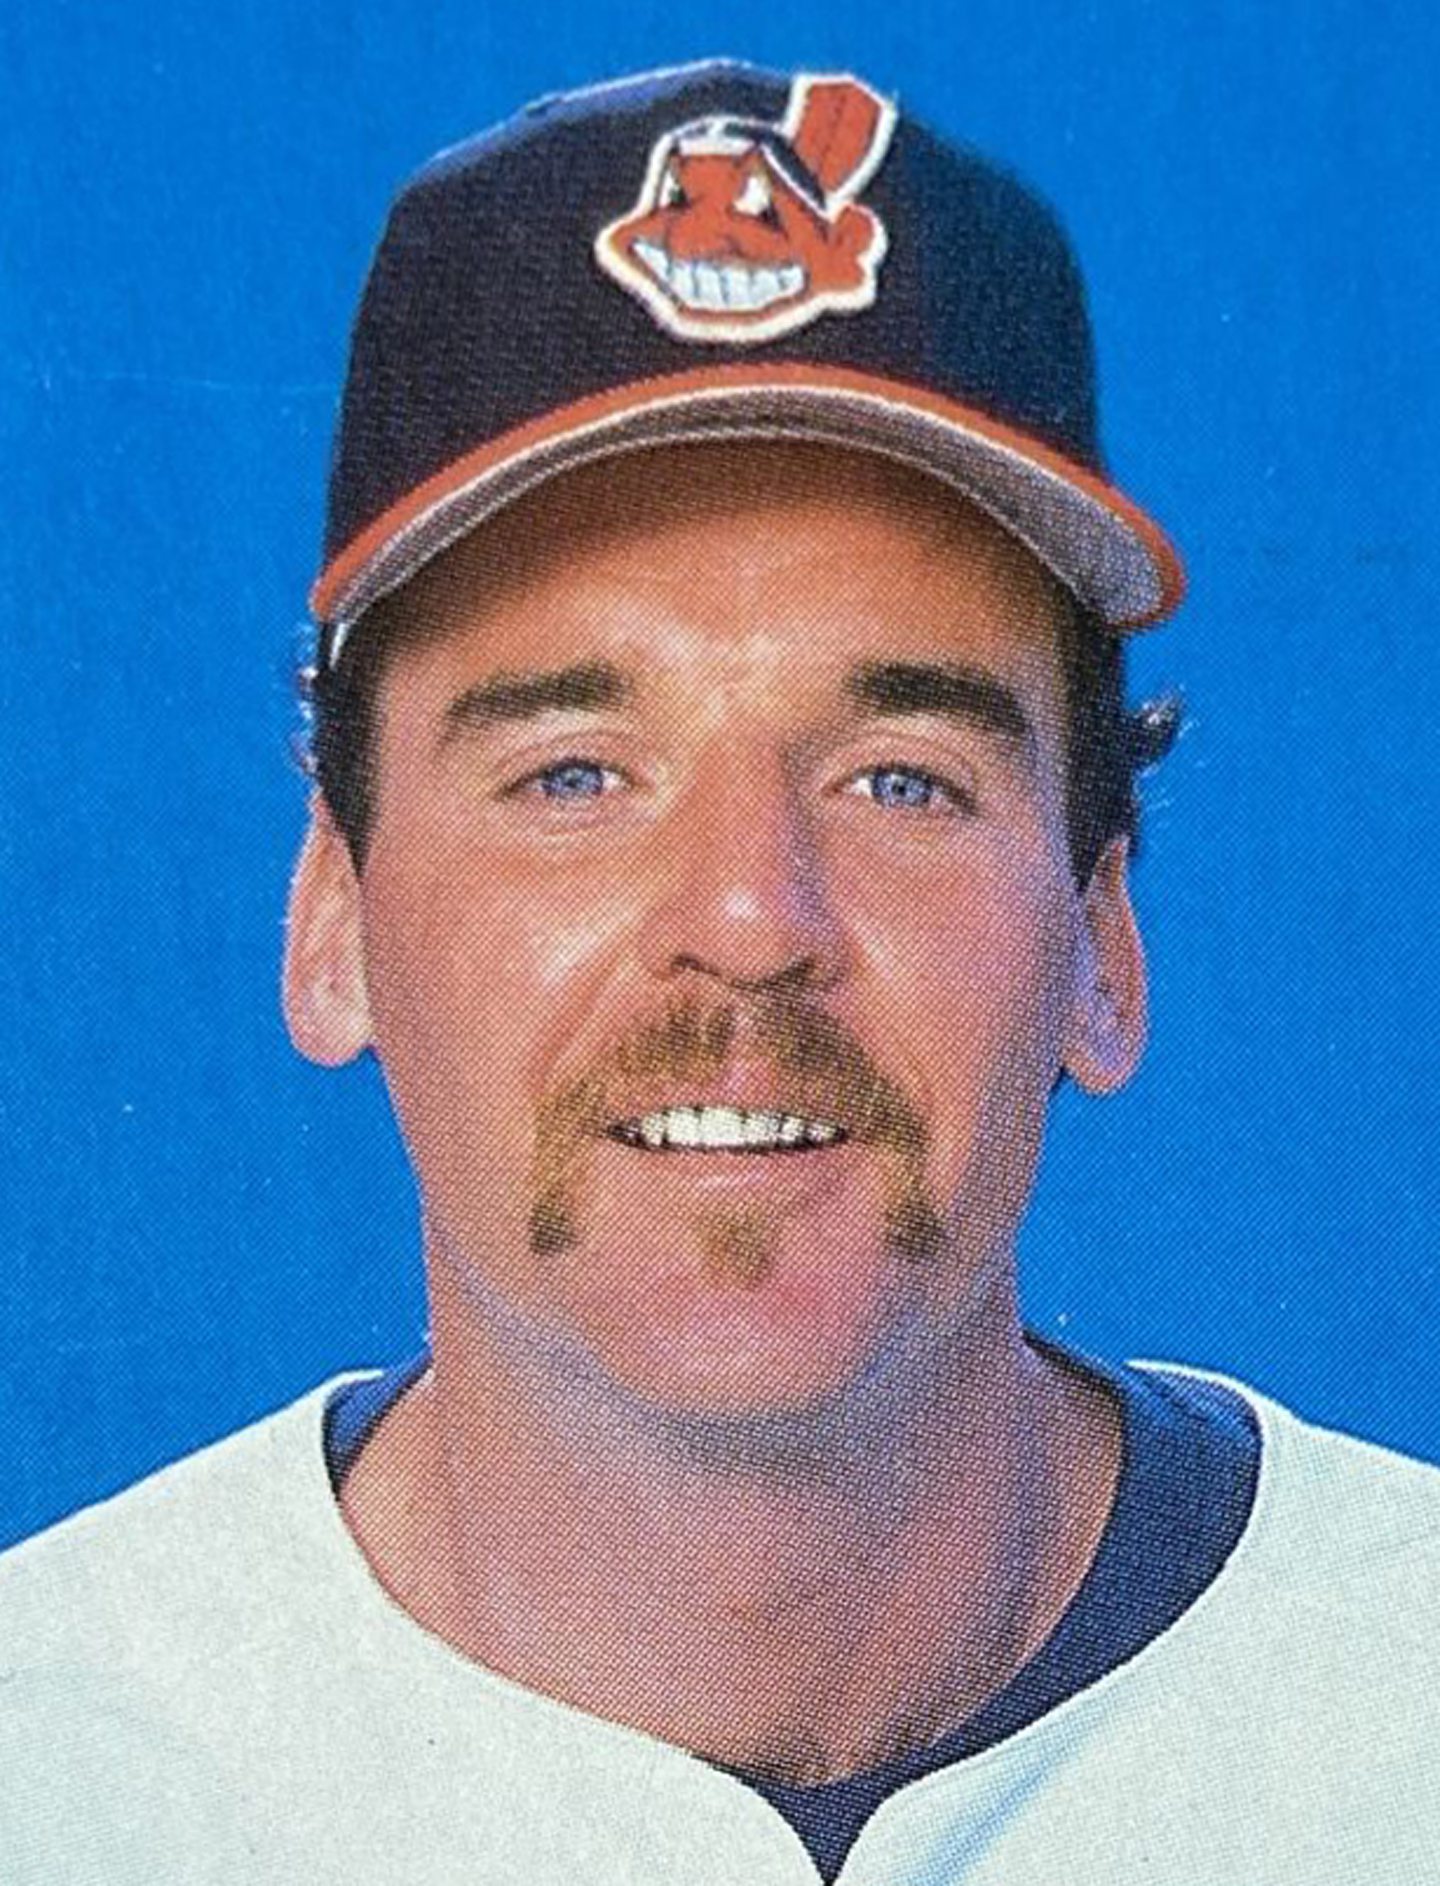 Tom Waddell, again in his Cleveland Indians uniform